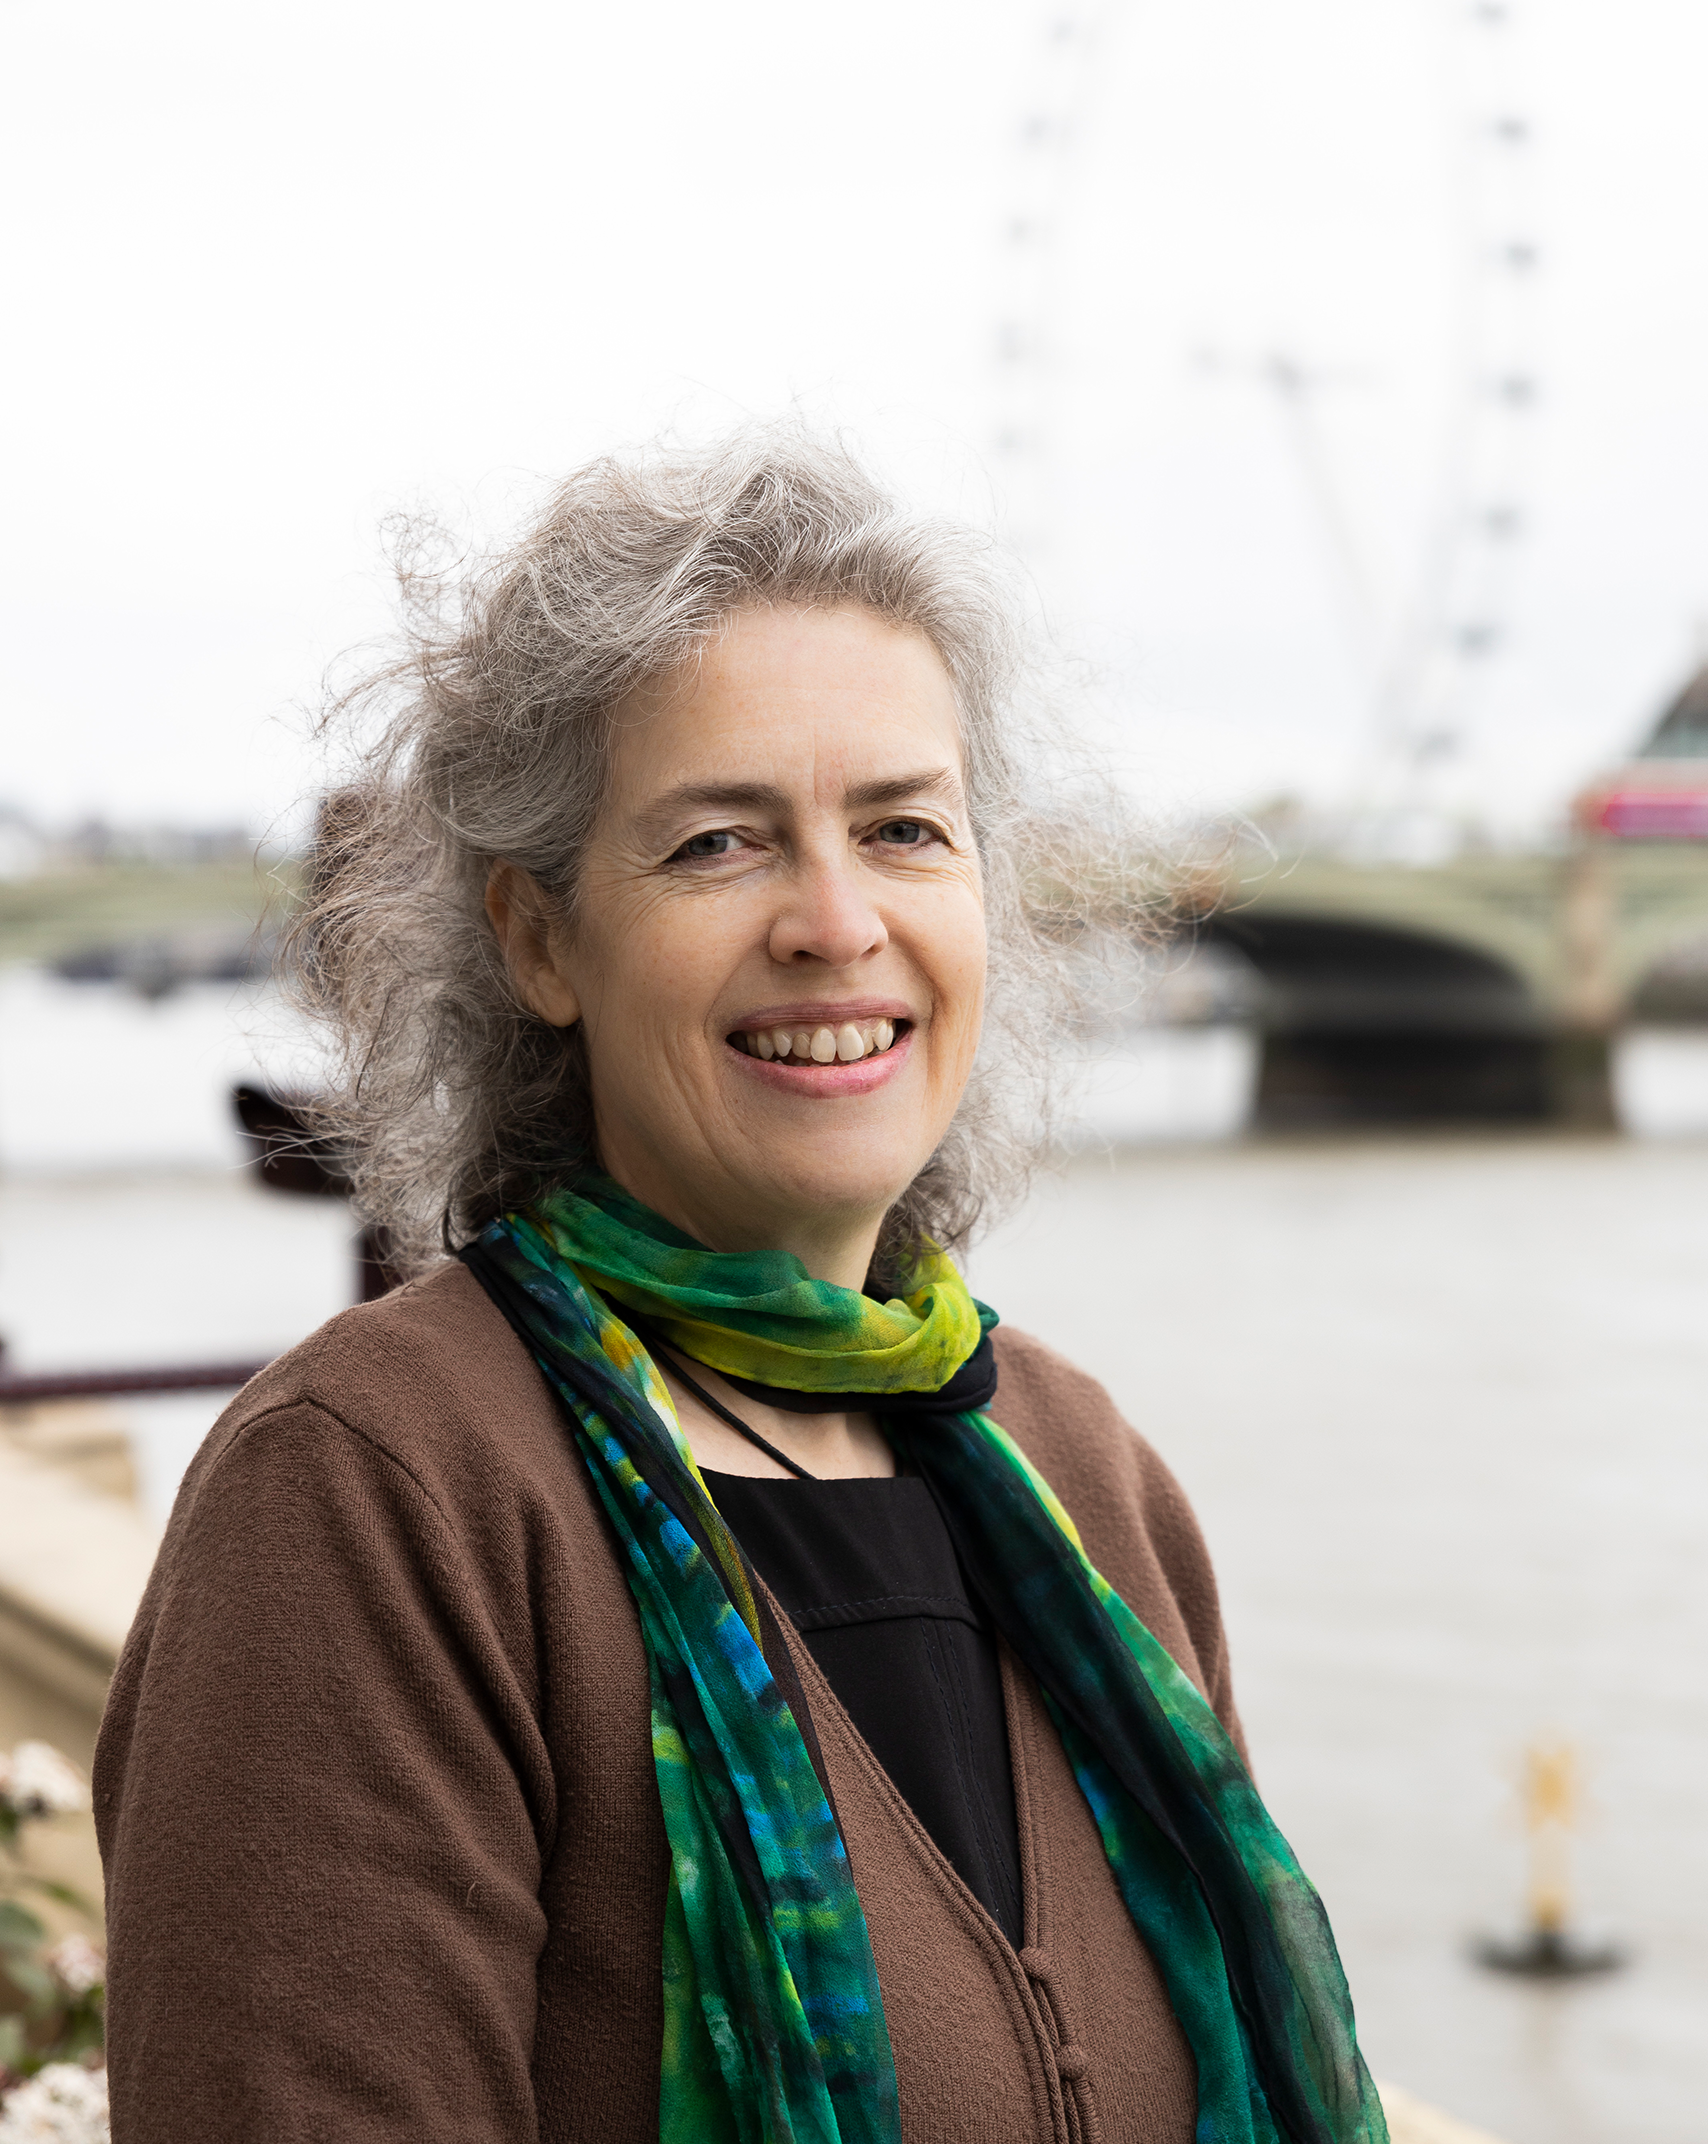 A headshot of Jen, from Genetic Alliance UK's Research team. She has grey hair and smiles with a big friendly smile that shows her teeth. She stands by the Thames river at the Westminster Parliament building and wears a green scarf and brown cardigan.